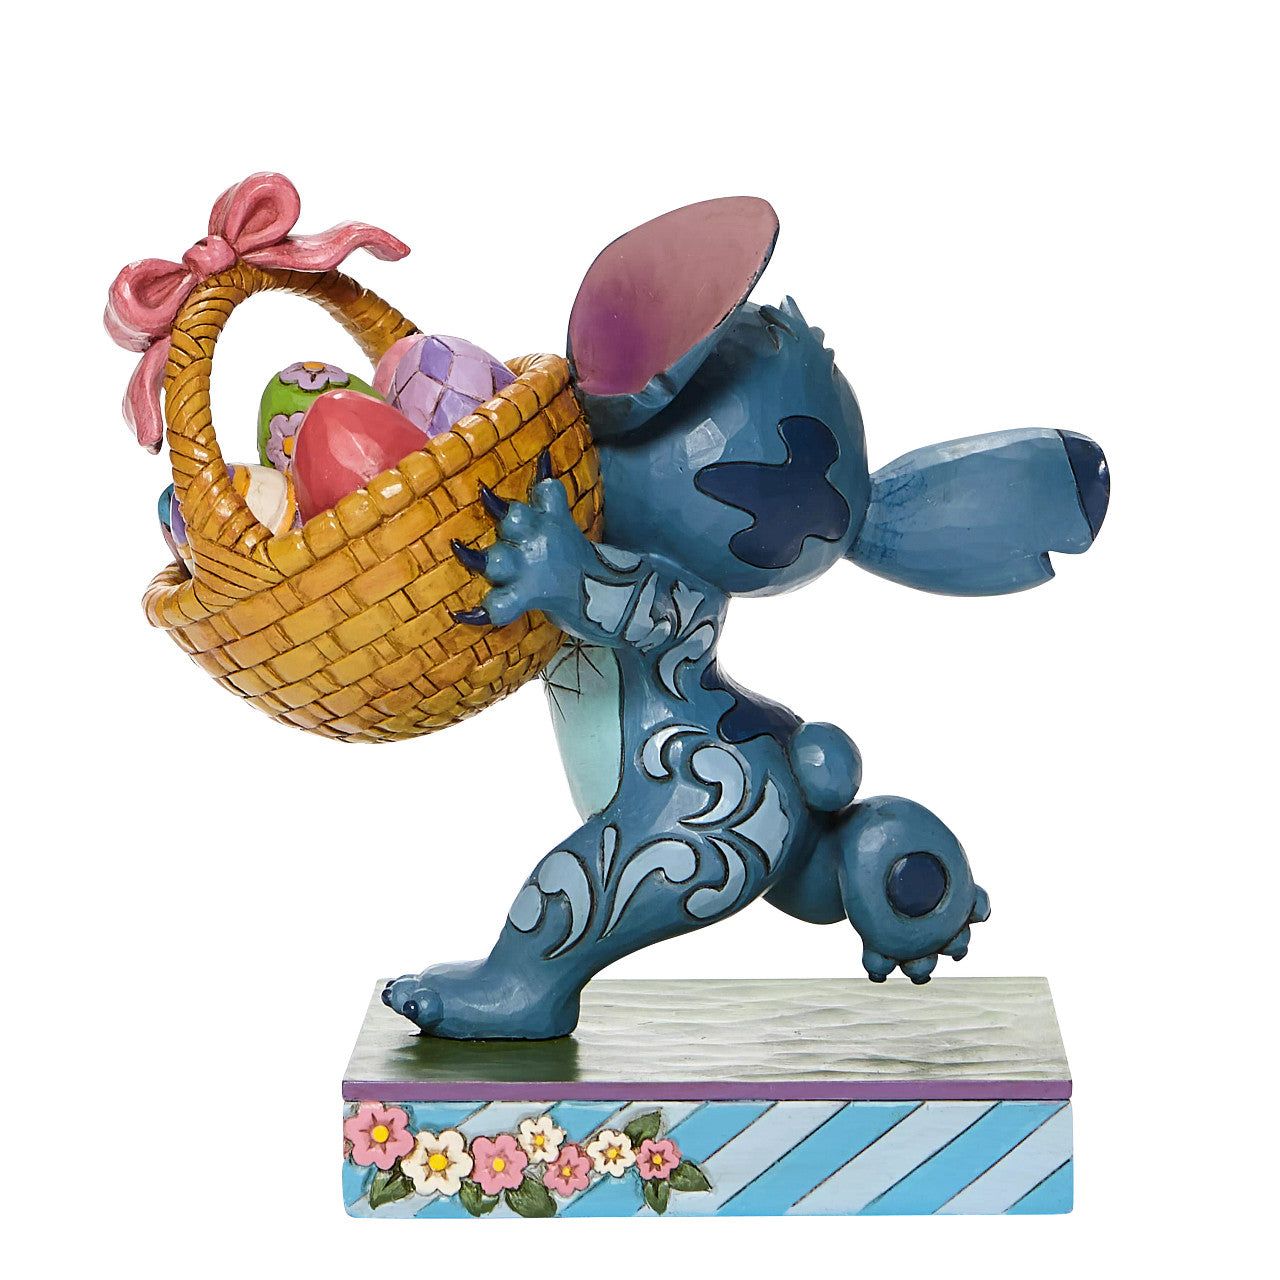 Bizarre Bunny - Stitch Running off with Easter Basket